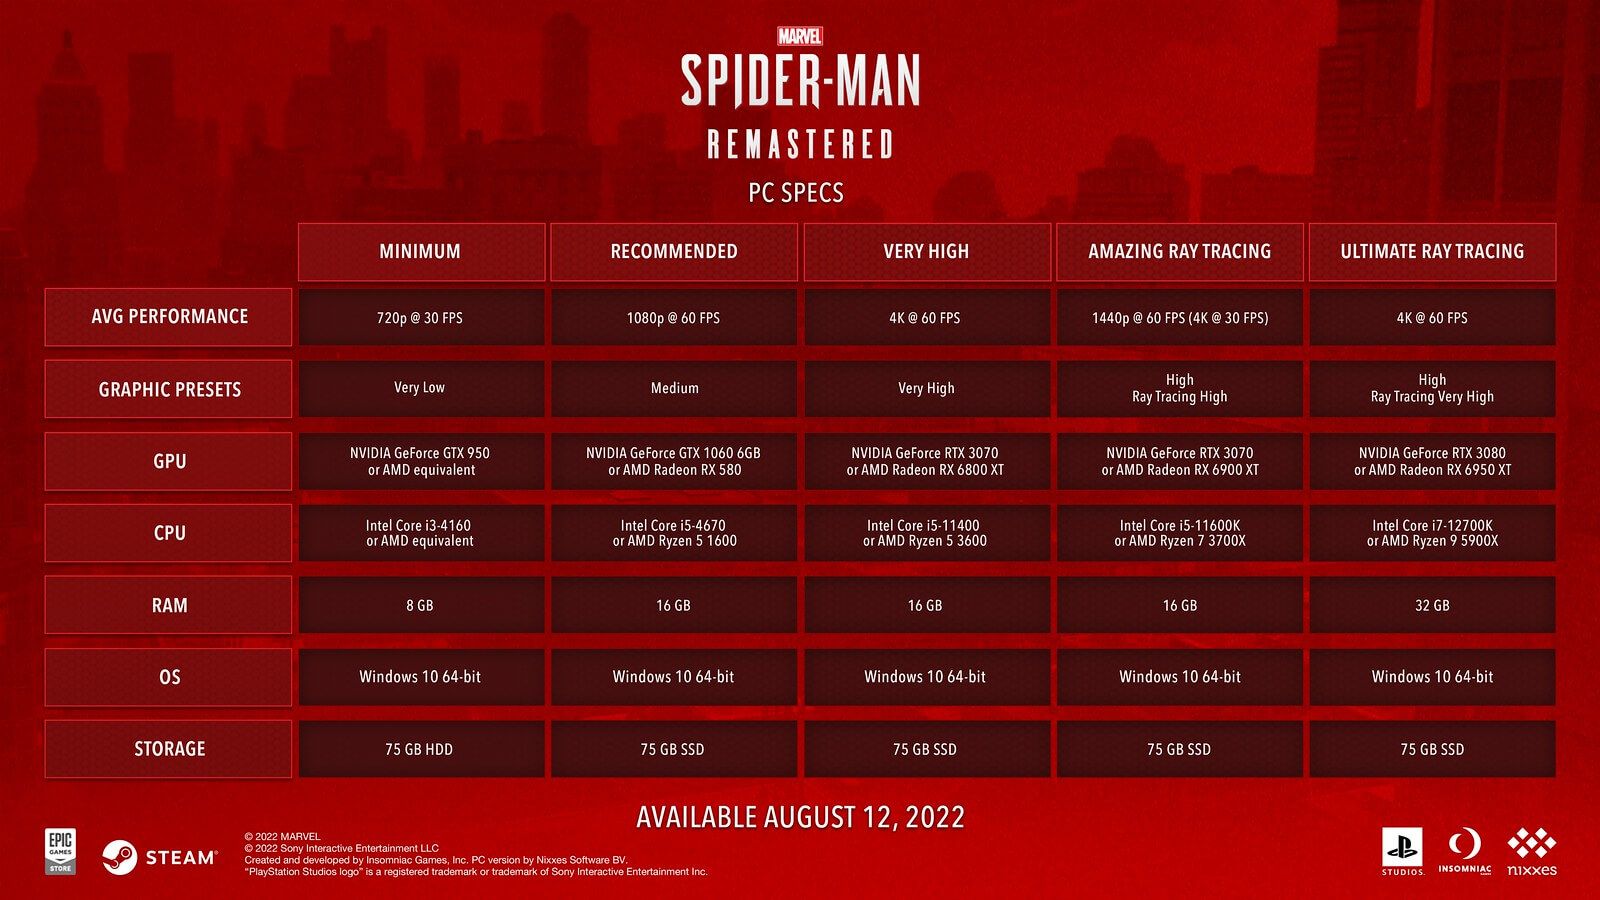 Marvels-Spider-Man-Remastered-PC-System-Requirements.jpg